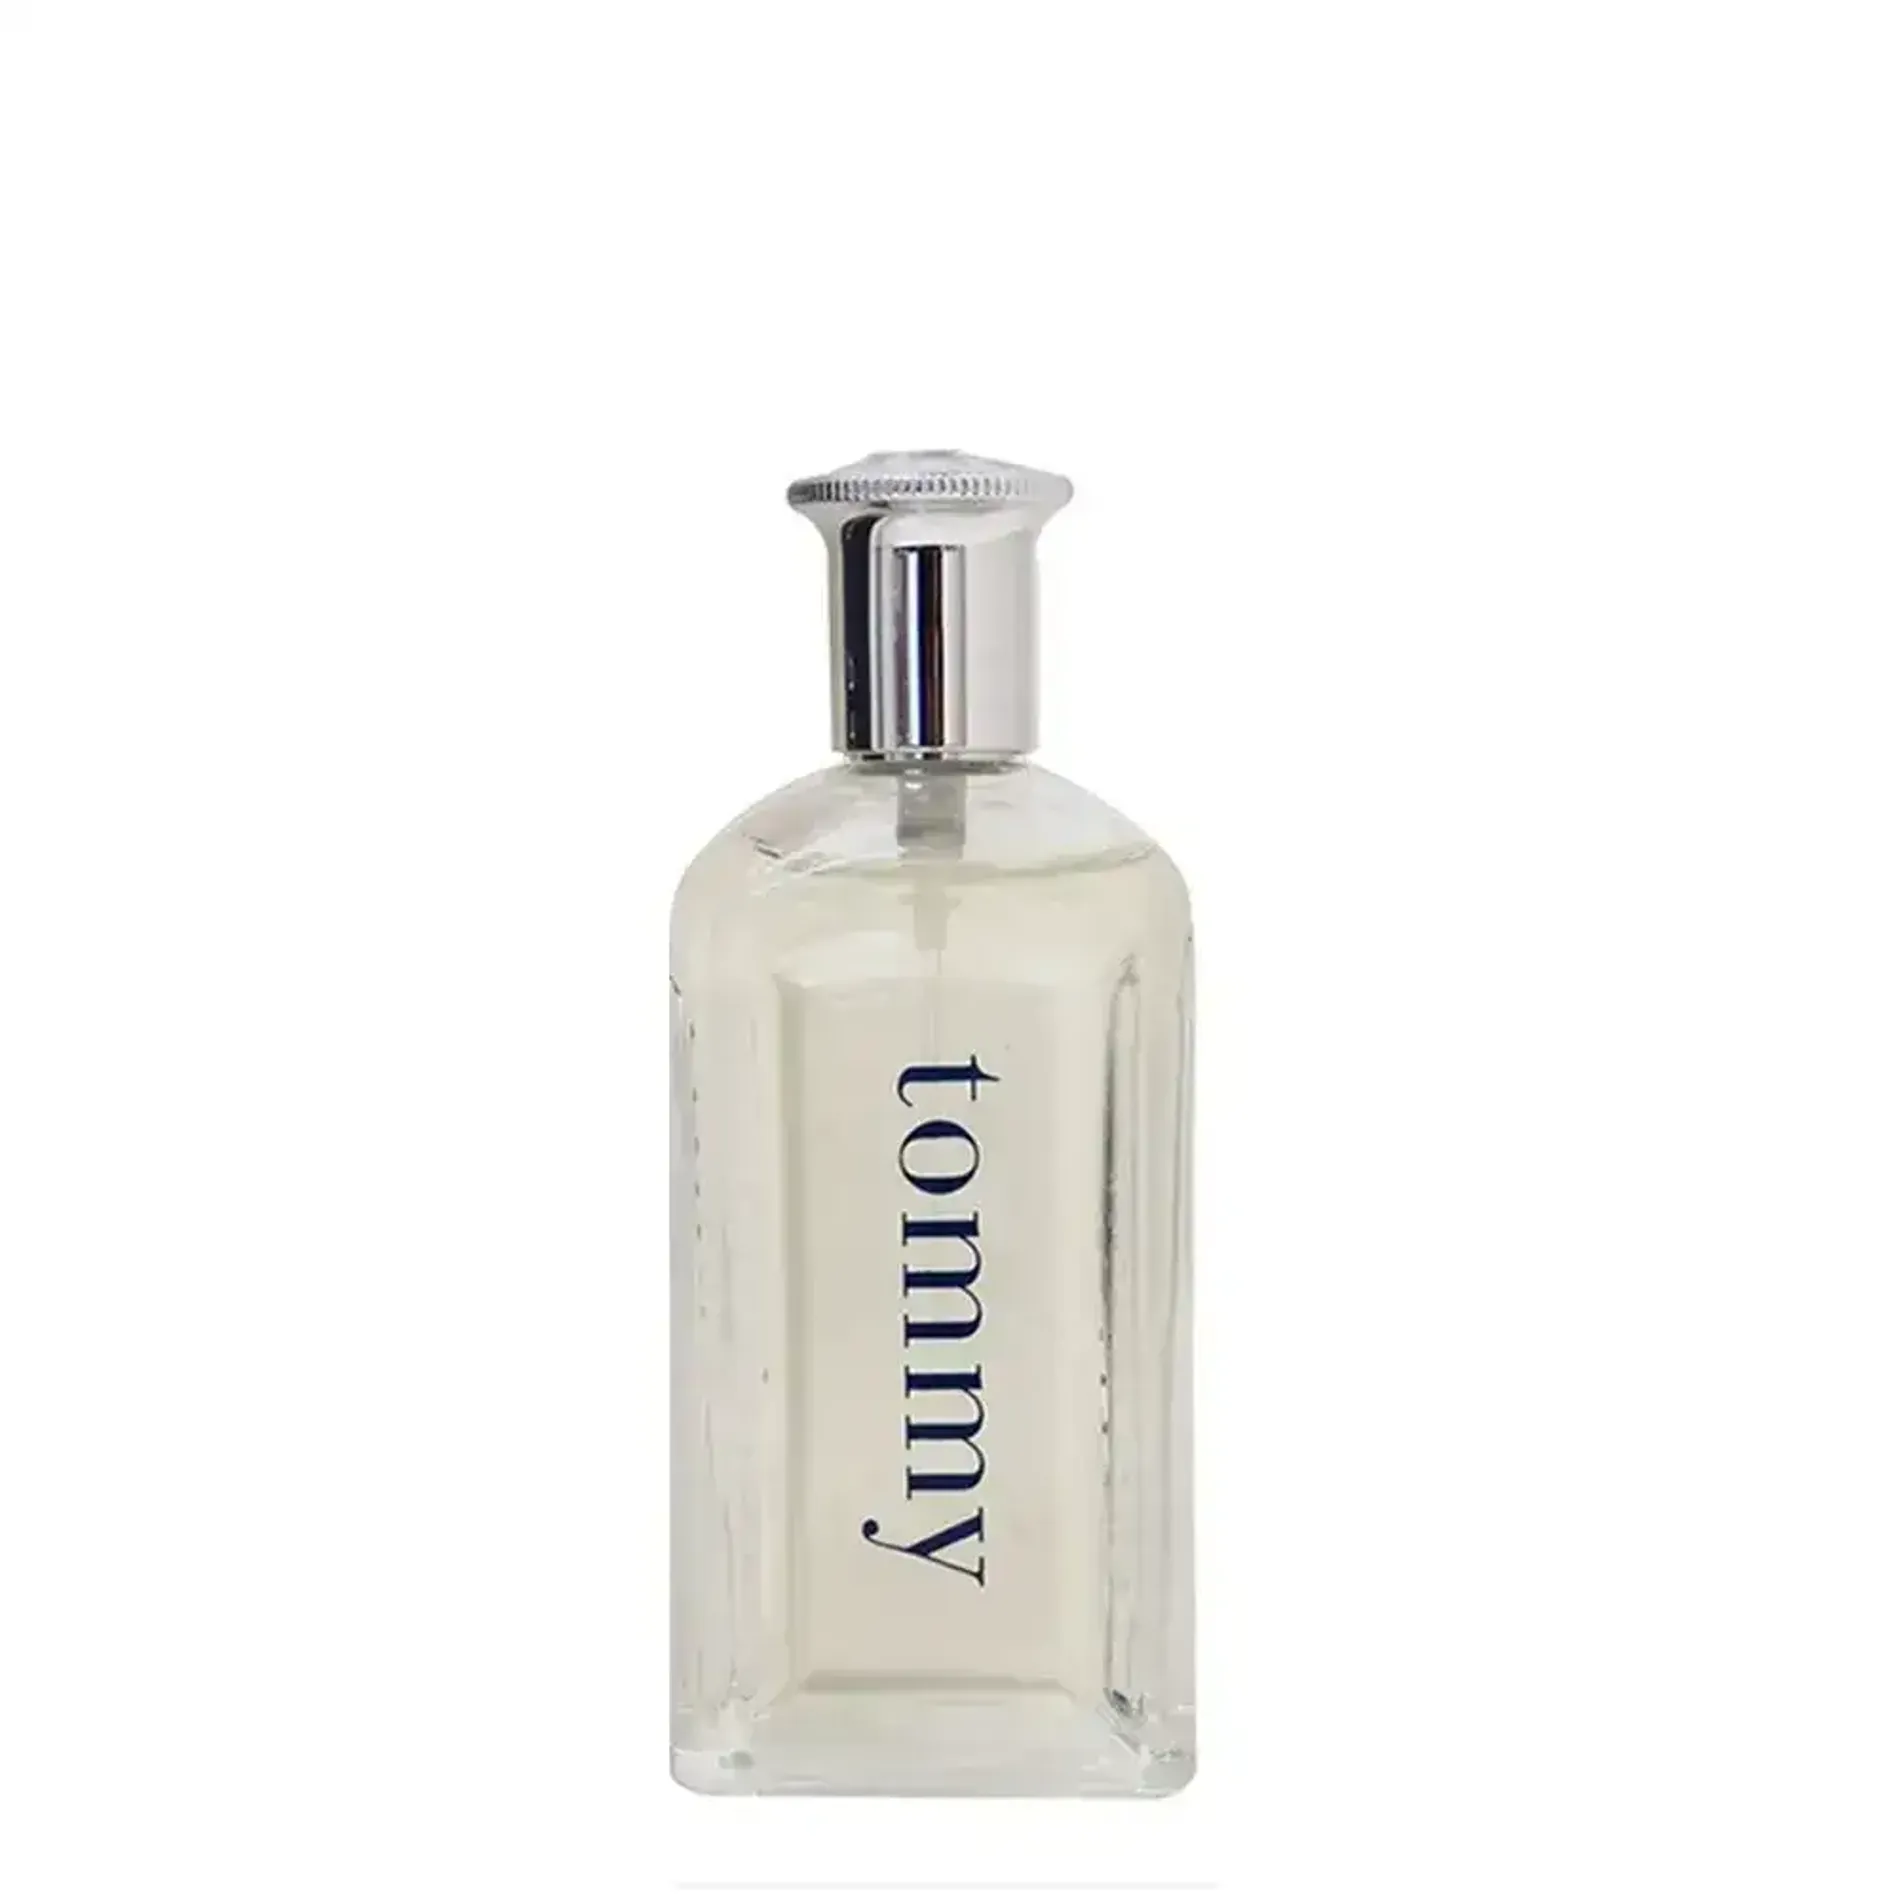 nuoc-hoa-danh-cho-nam-tommy-cologne-spray-edt-30ml-100ml-3